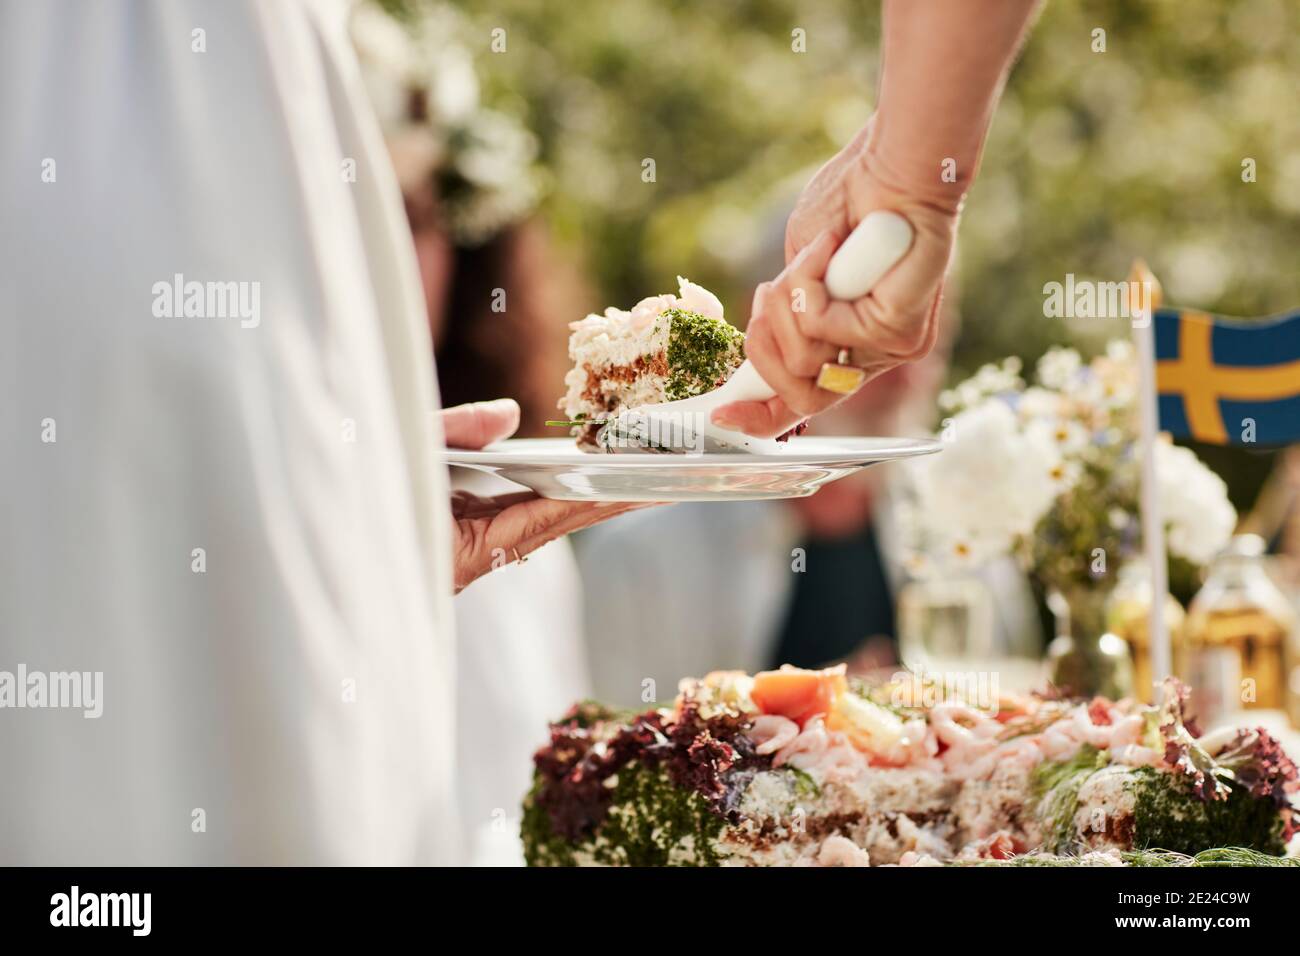 Close-up of woman putting cake on plate Stock Photo